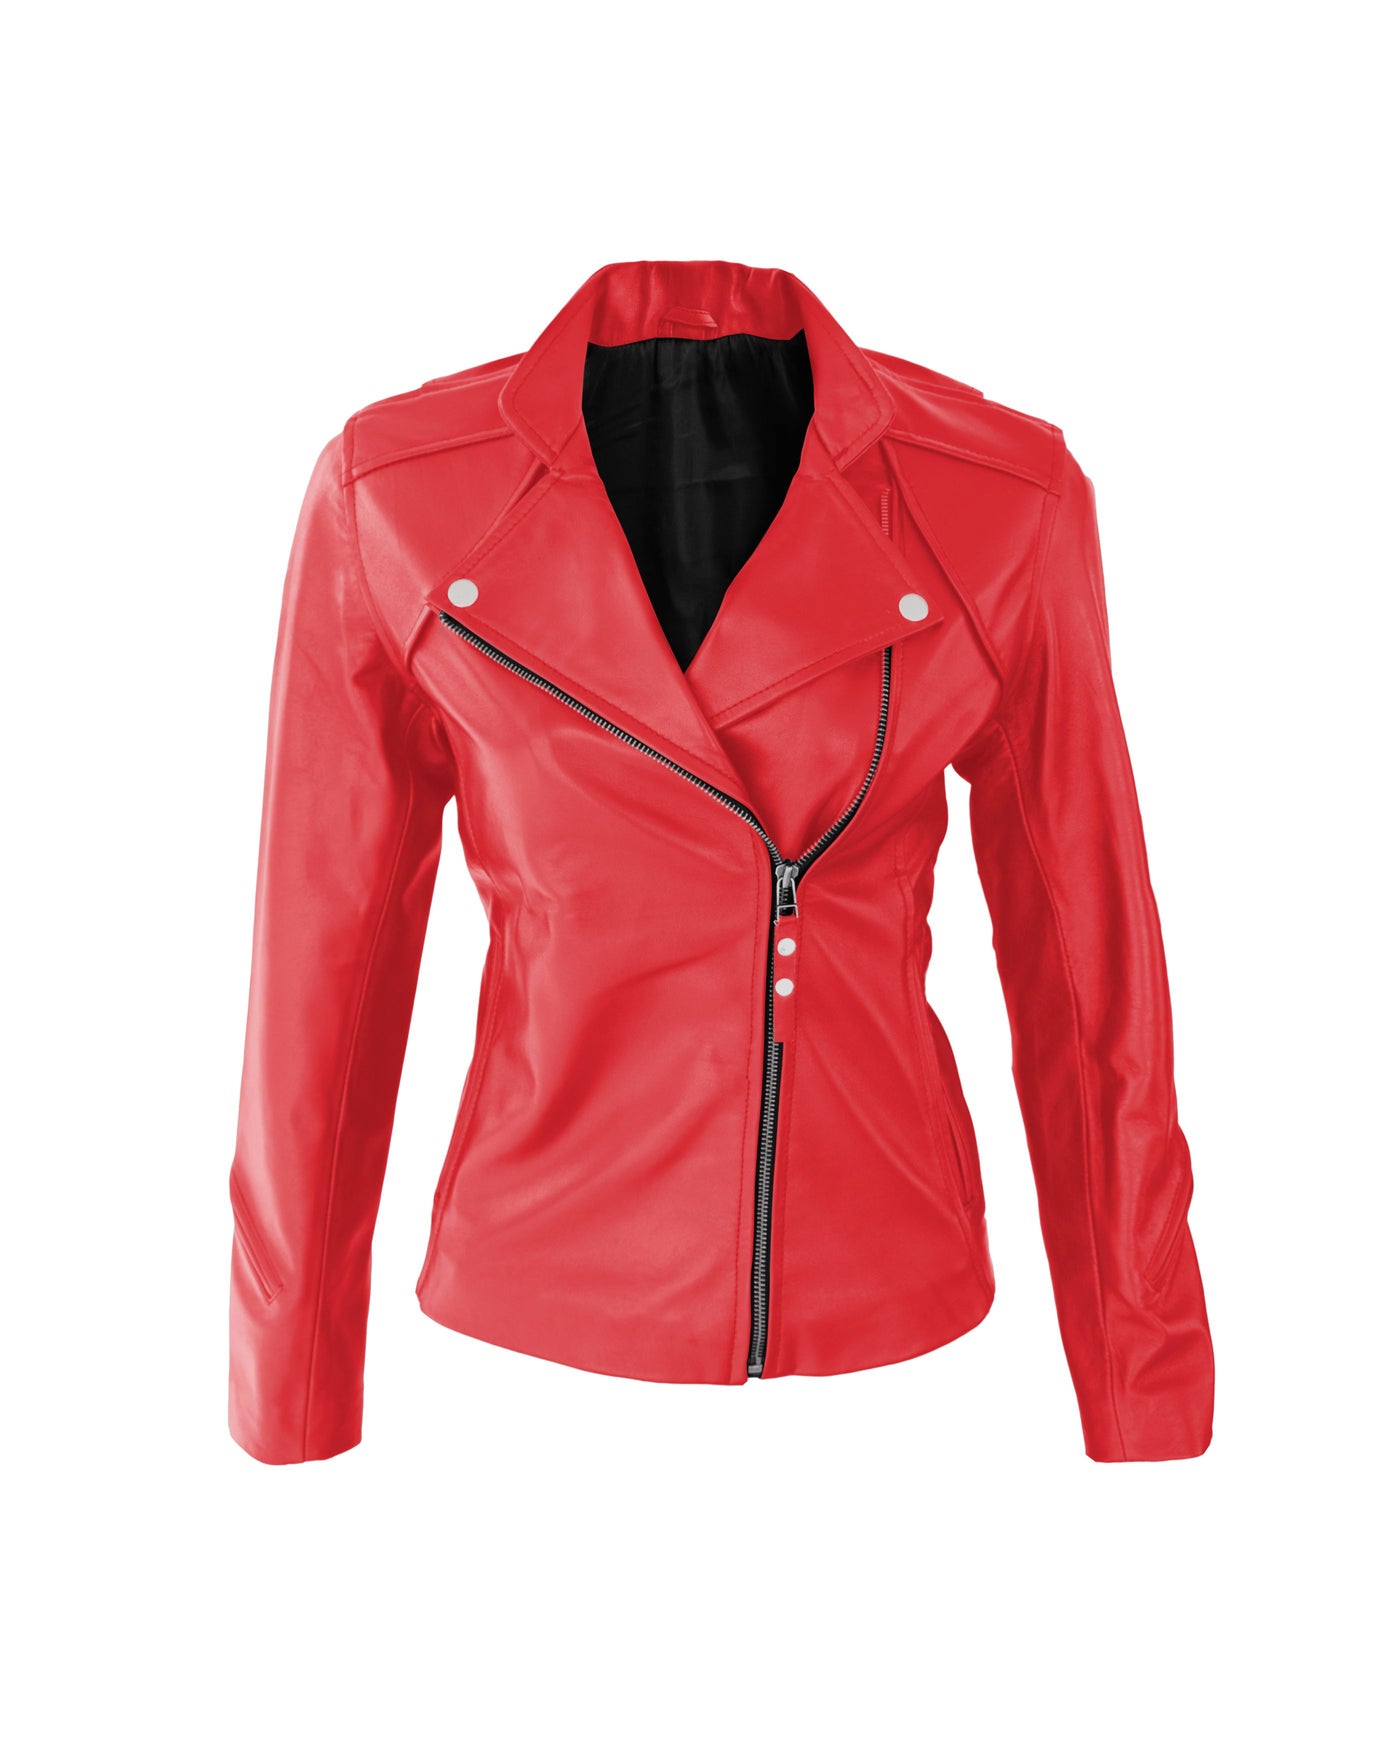 Red leather jacket women